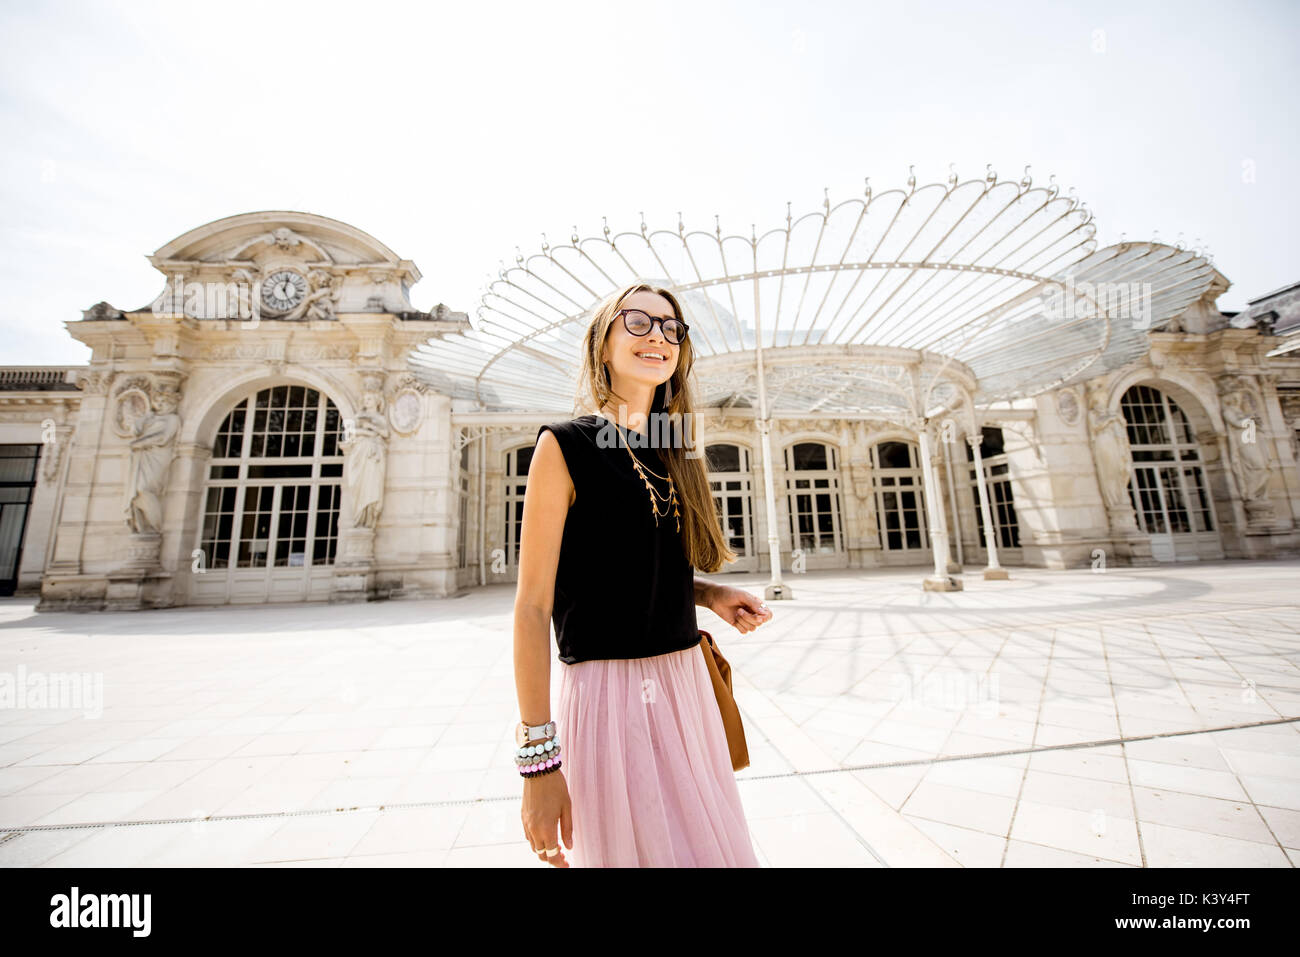 Woman near the old beautiful building in Vichy city, France Stock Photo